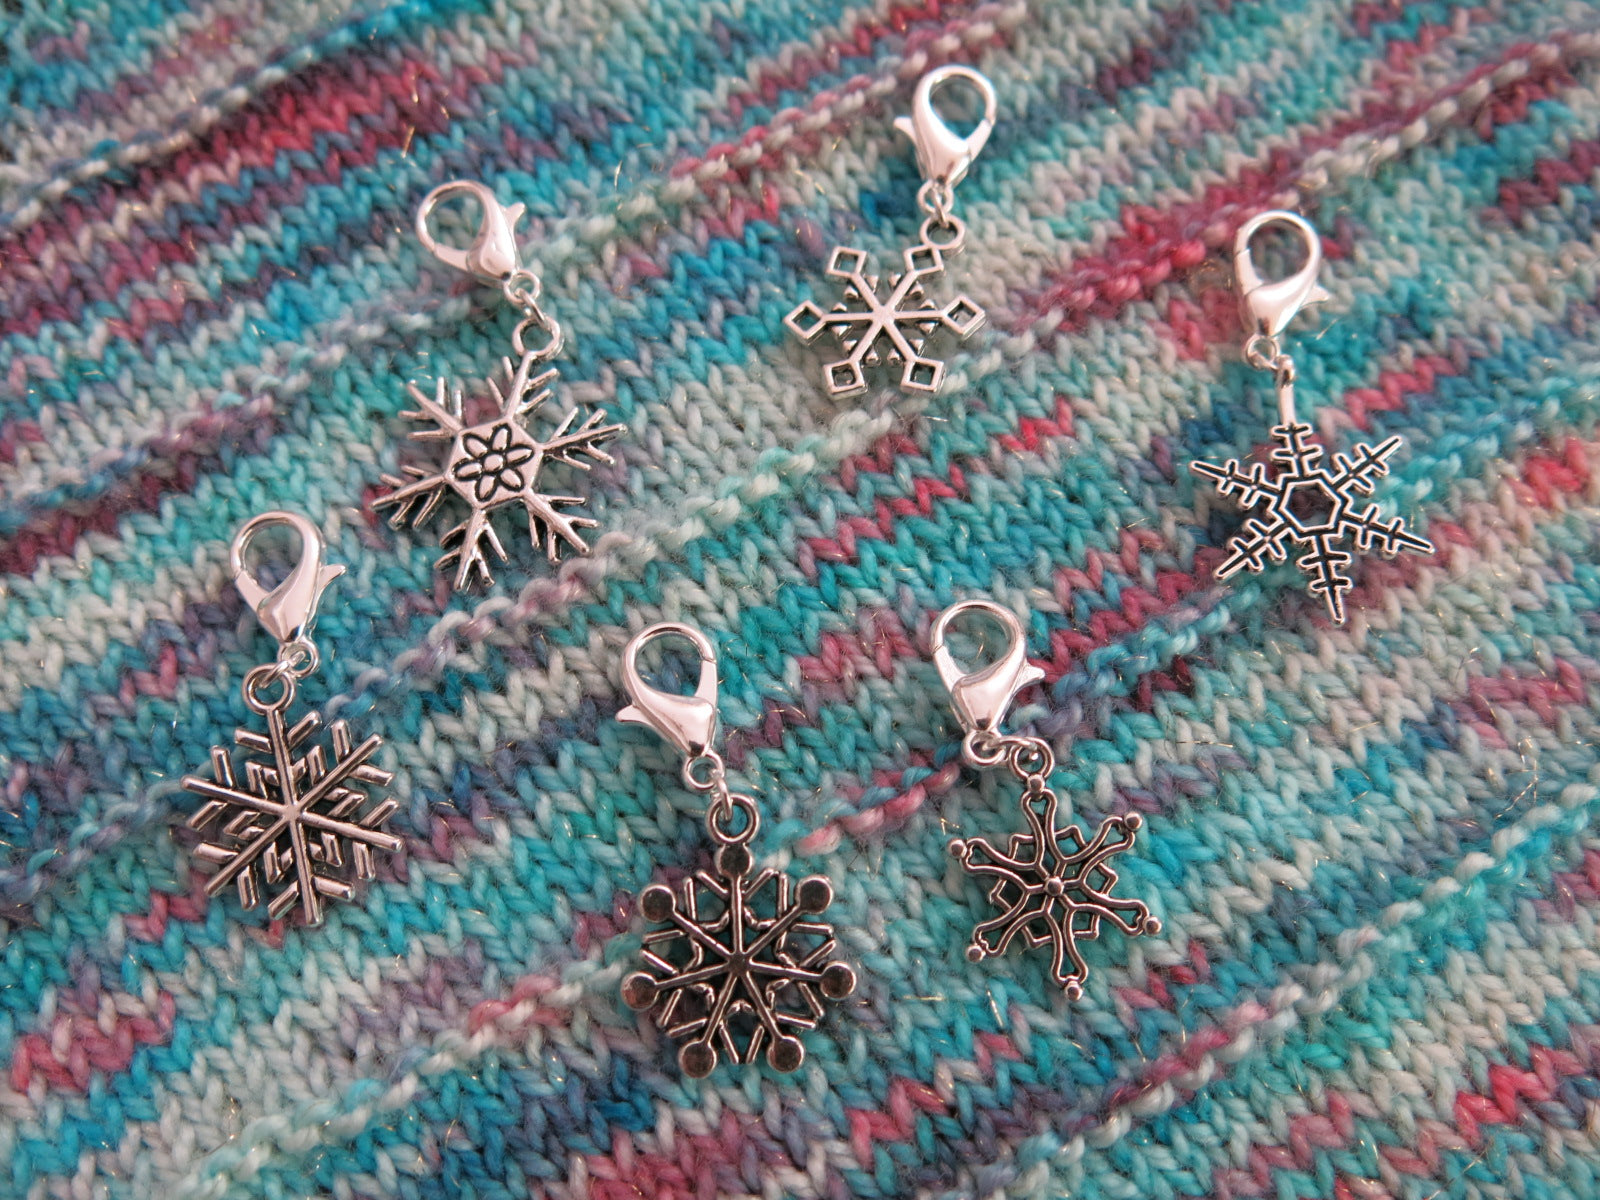 set of snowflake charms on lobster clasps for knitting and crochet